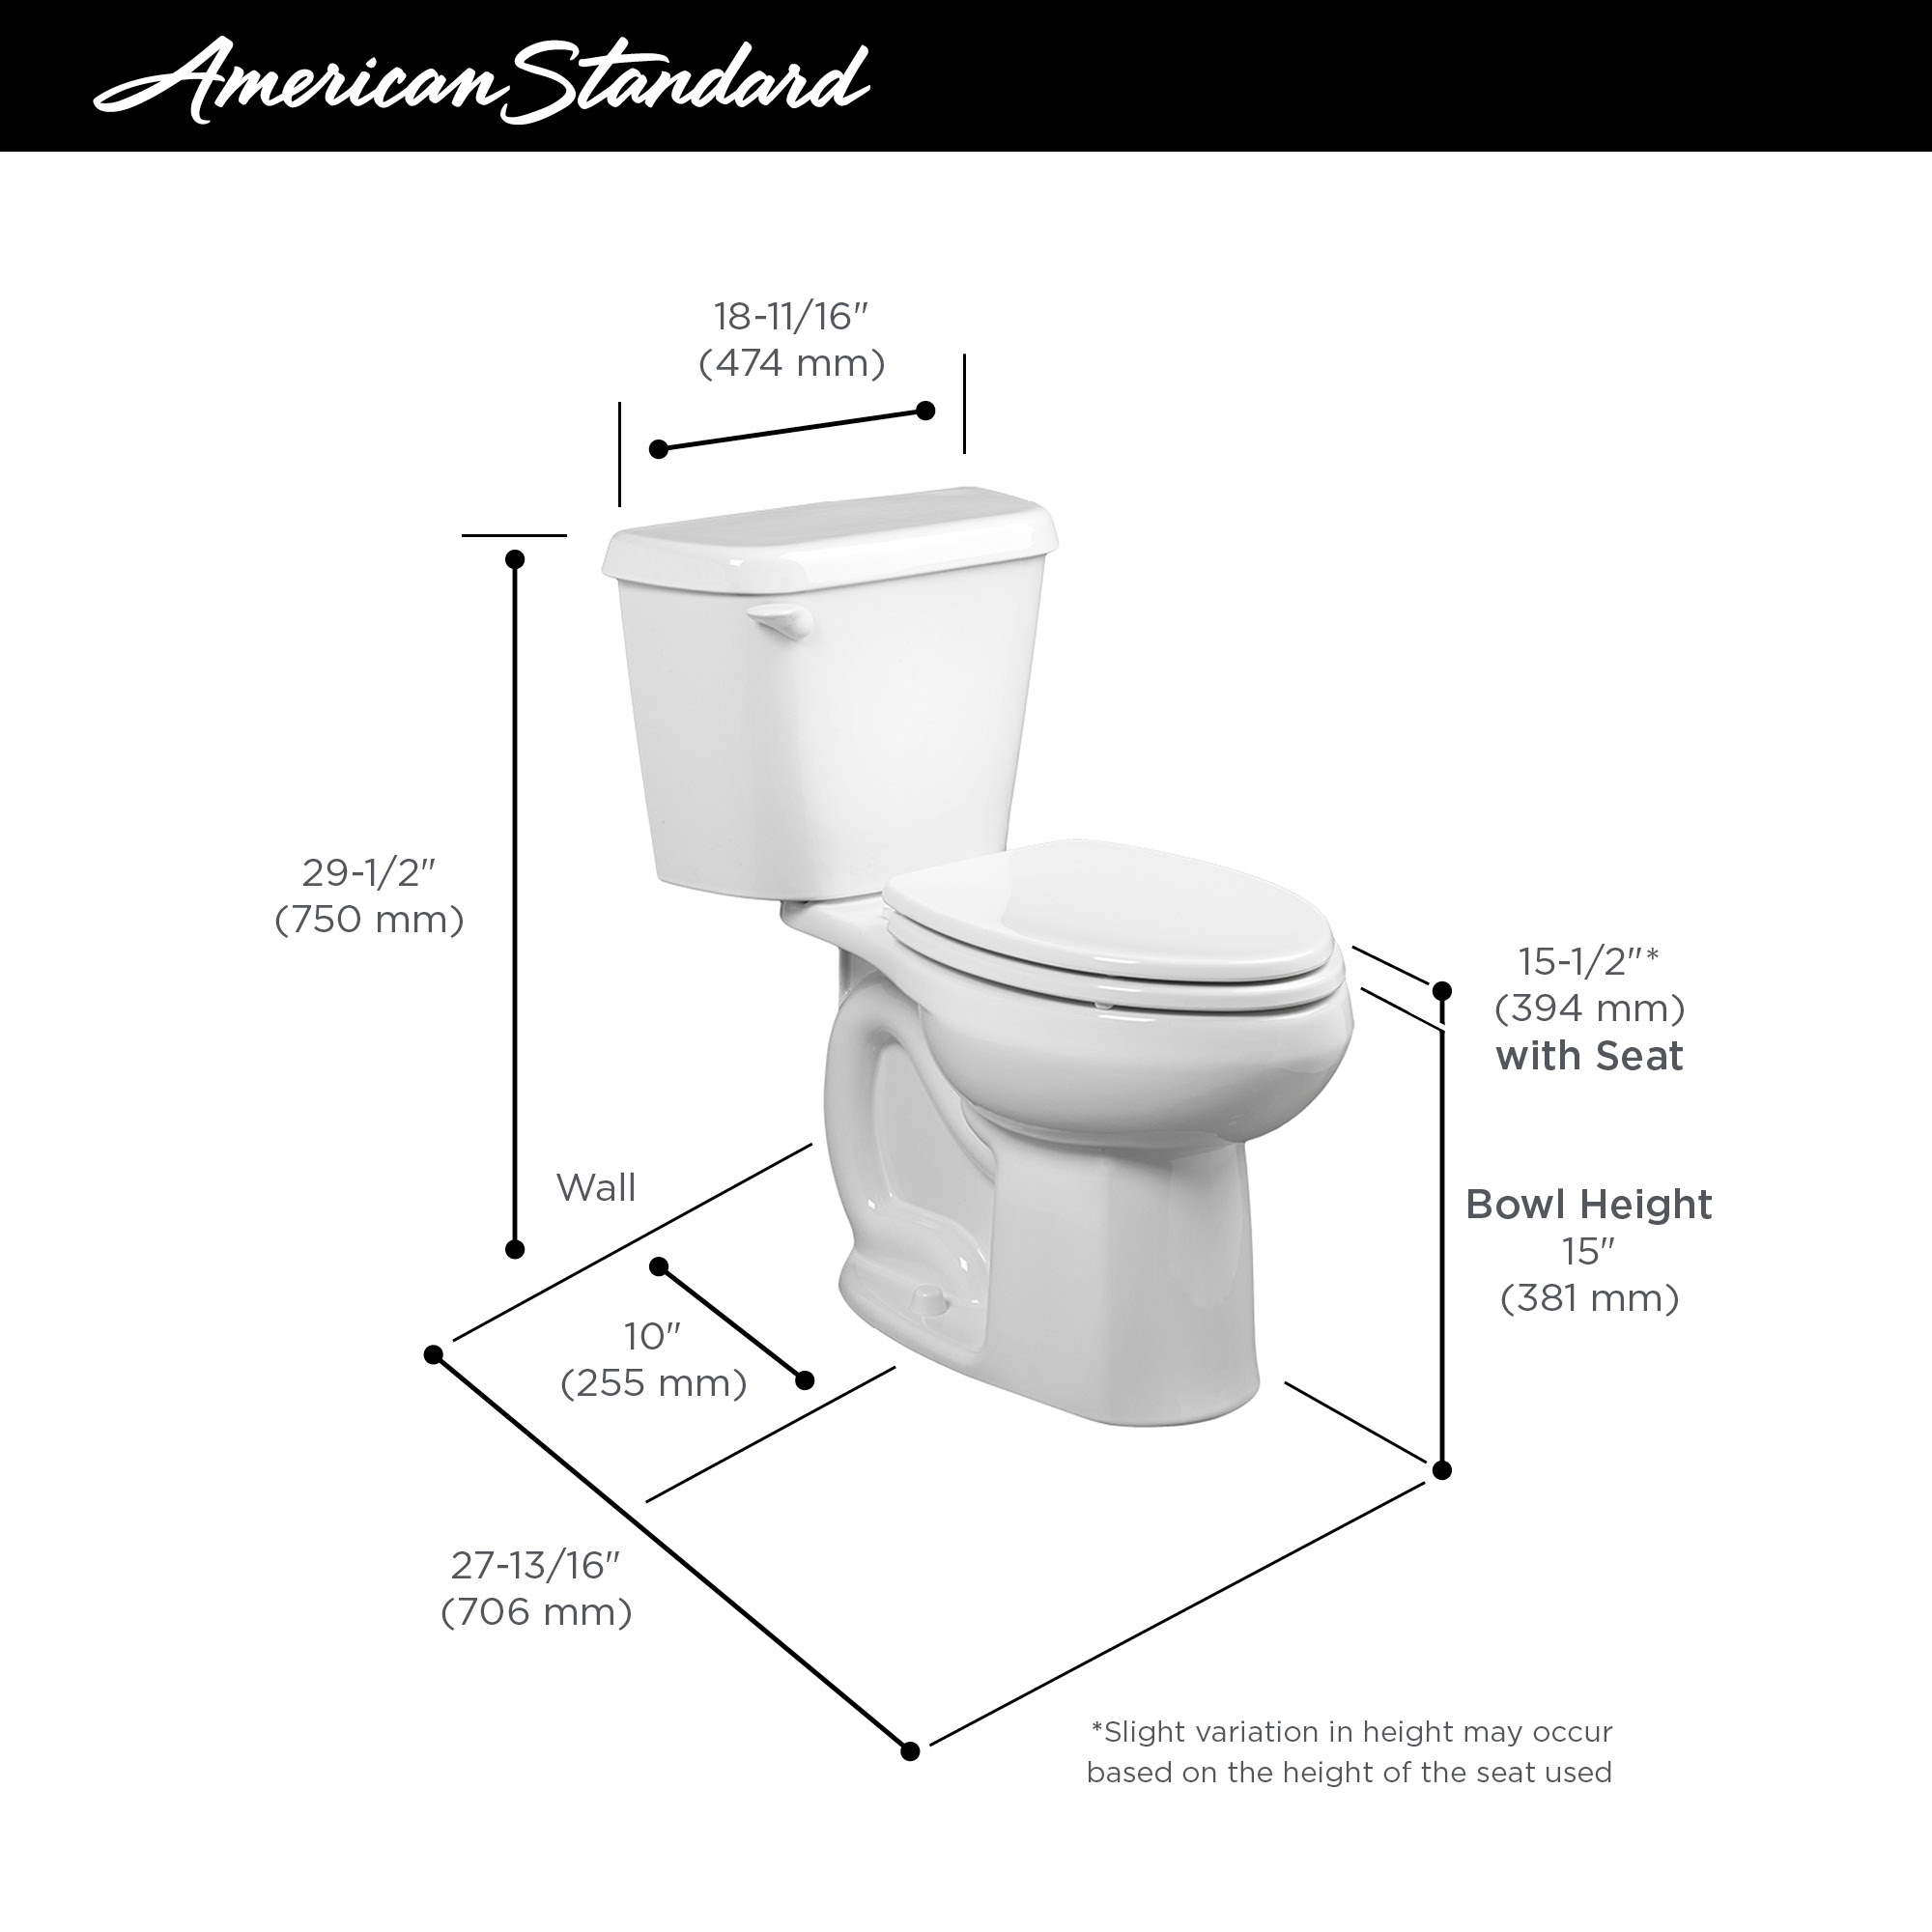 Colony® Two-Piece 1.28 gpf/4.8 Lpf Standard Height Elongated 10-Inch Rough Toilet Less Seat